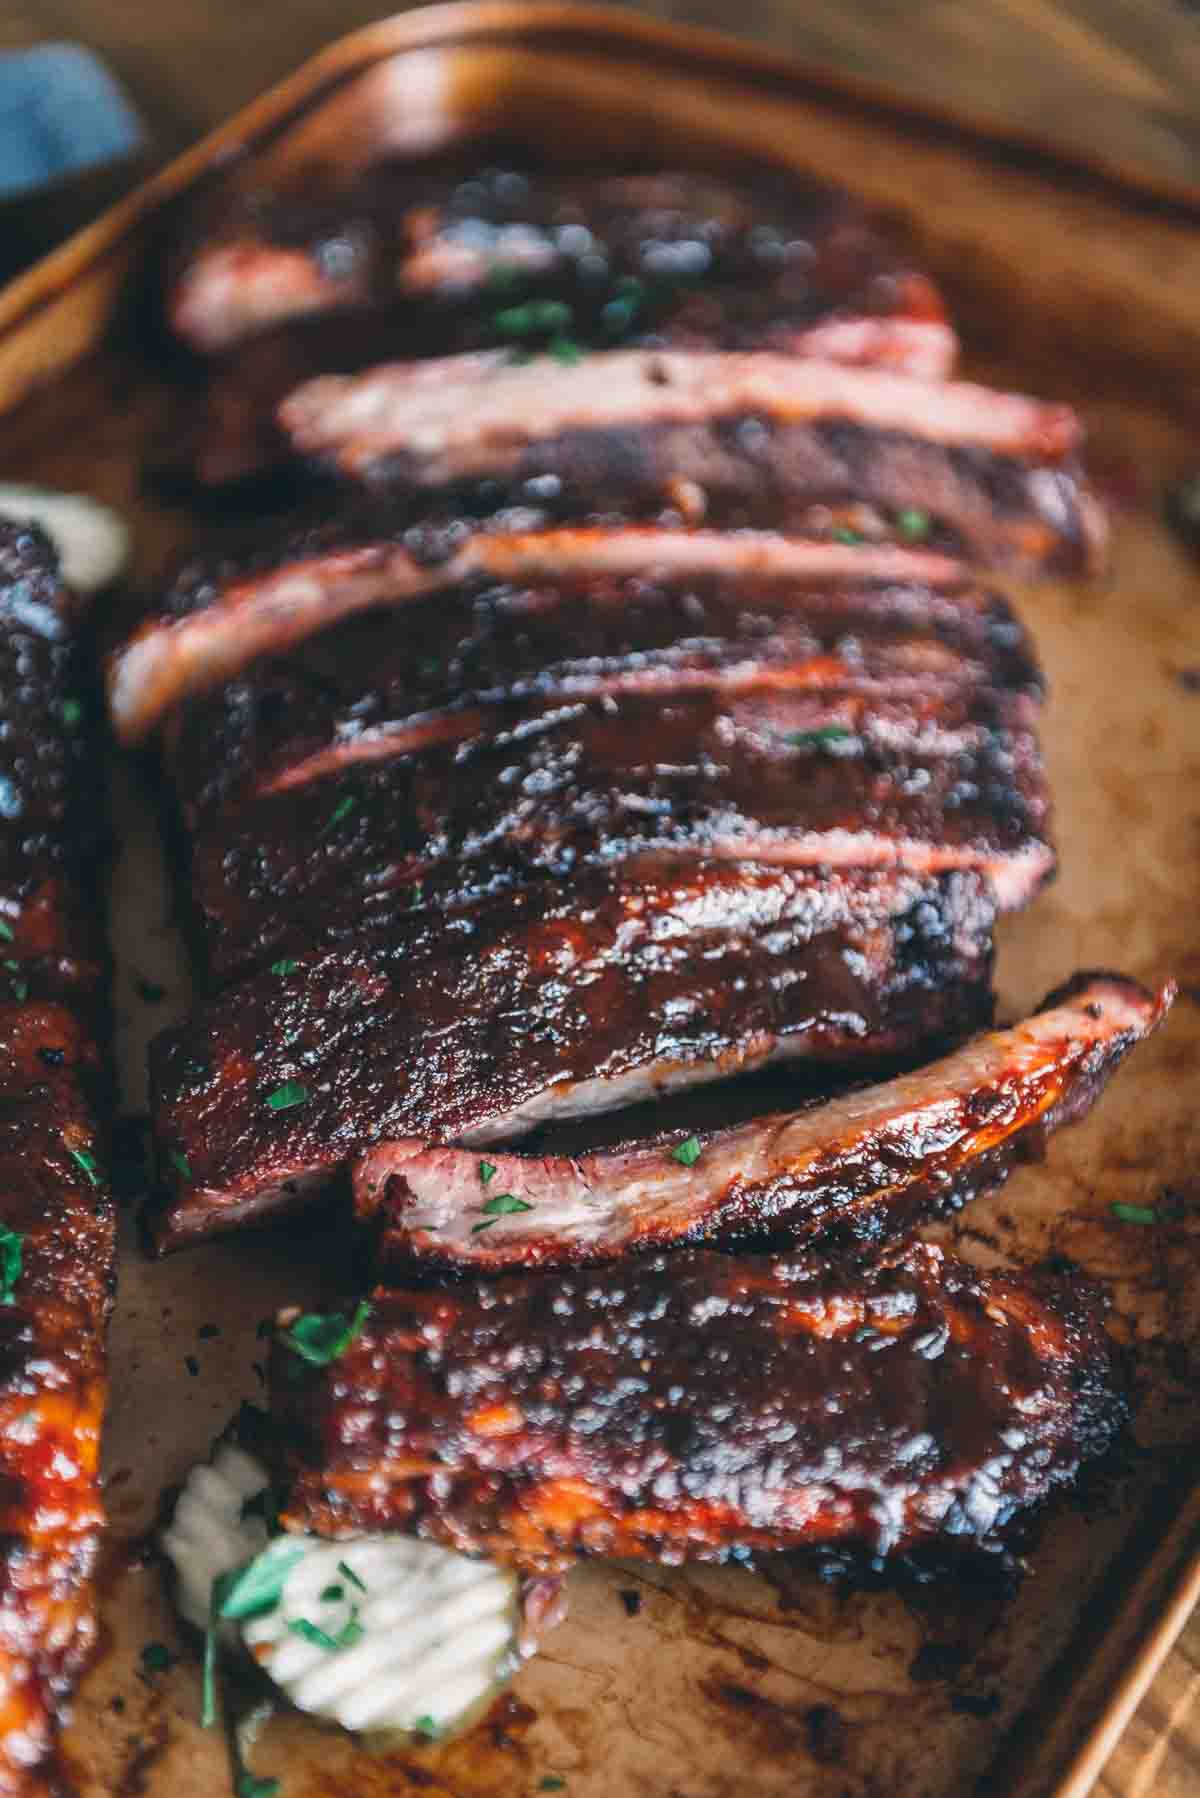 Ribs smoked and sliced to serve on a tray. 